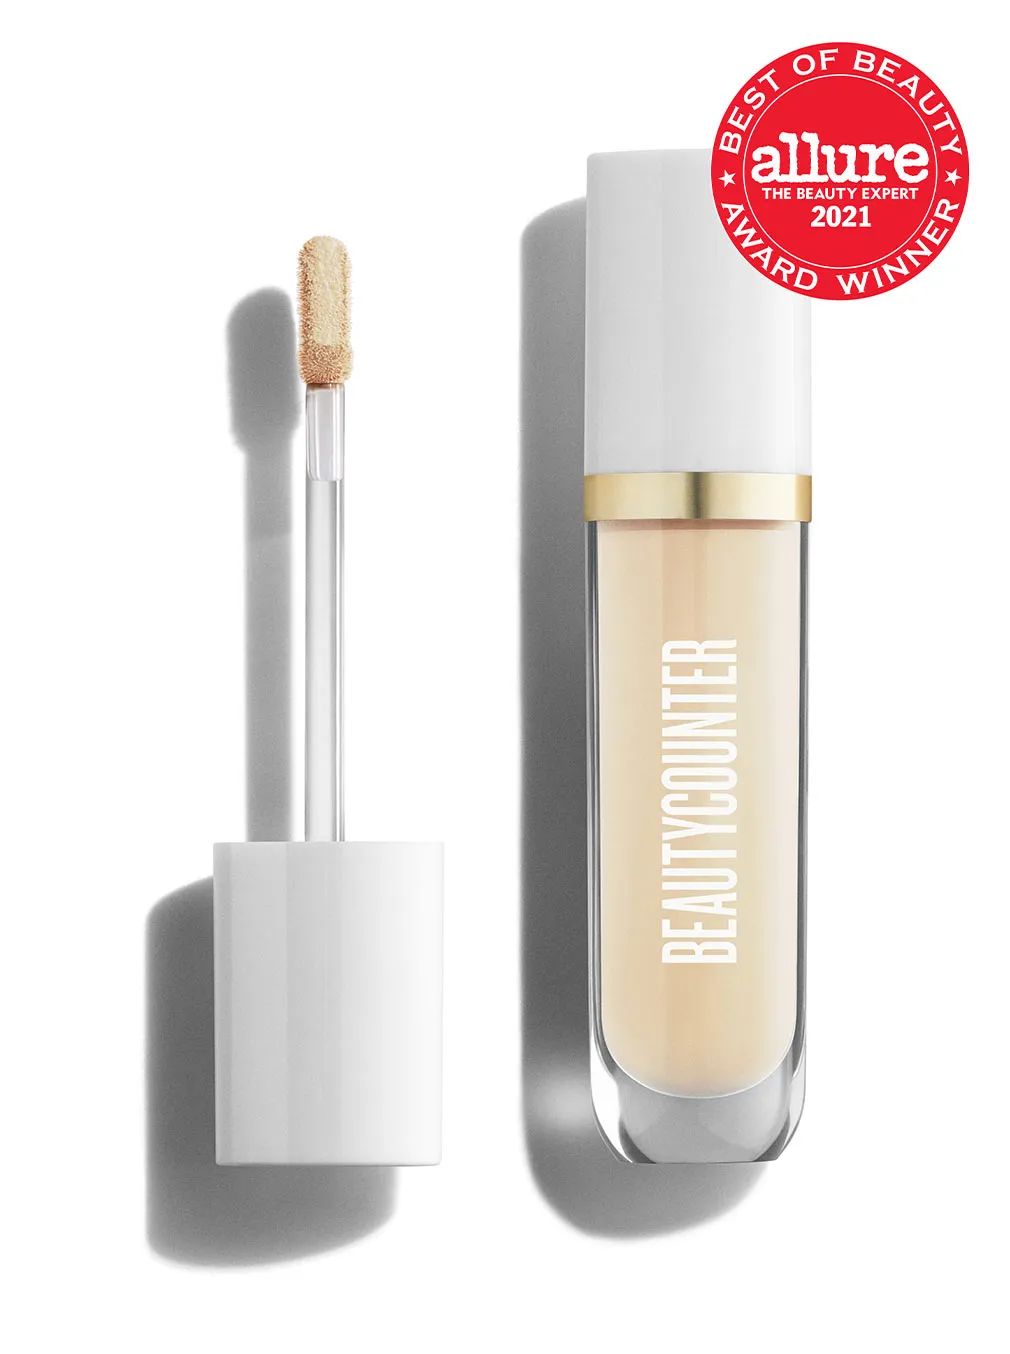 Skin Twin Creamy Concealer - Beautycounter - Skin Care, Makeup, Bath and Body and more! | Beautycounter.com